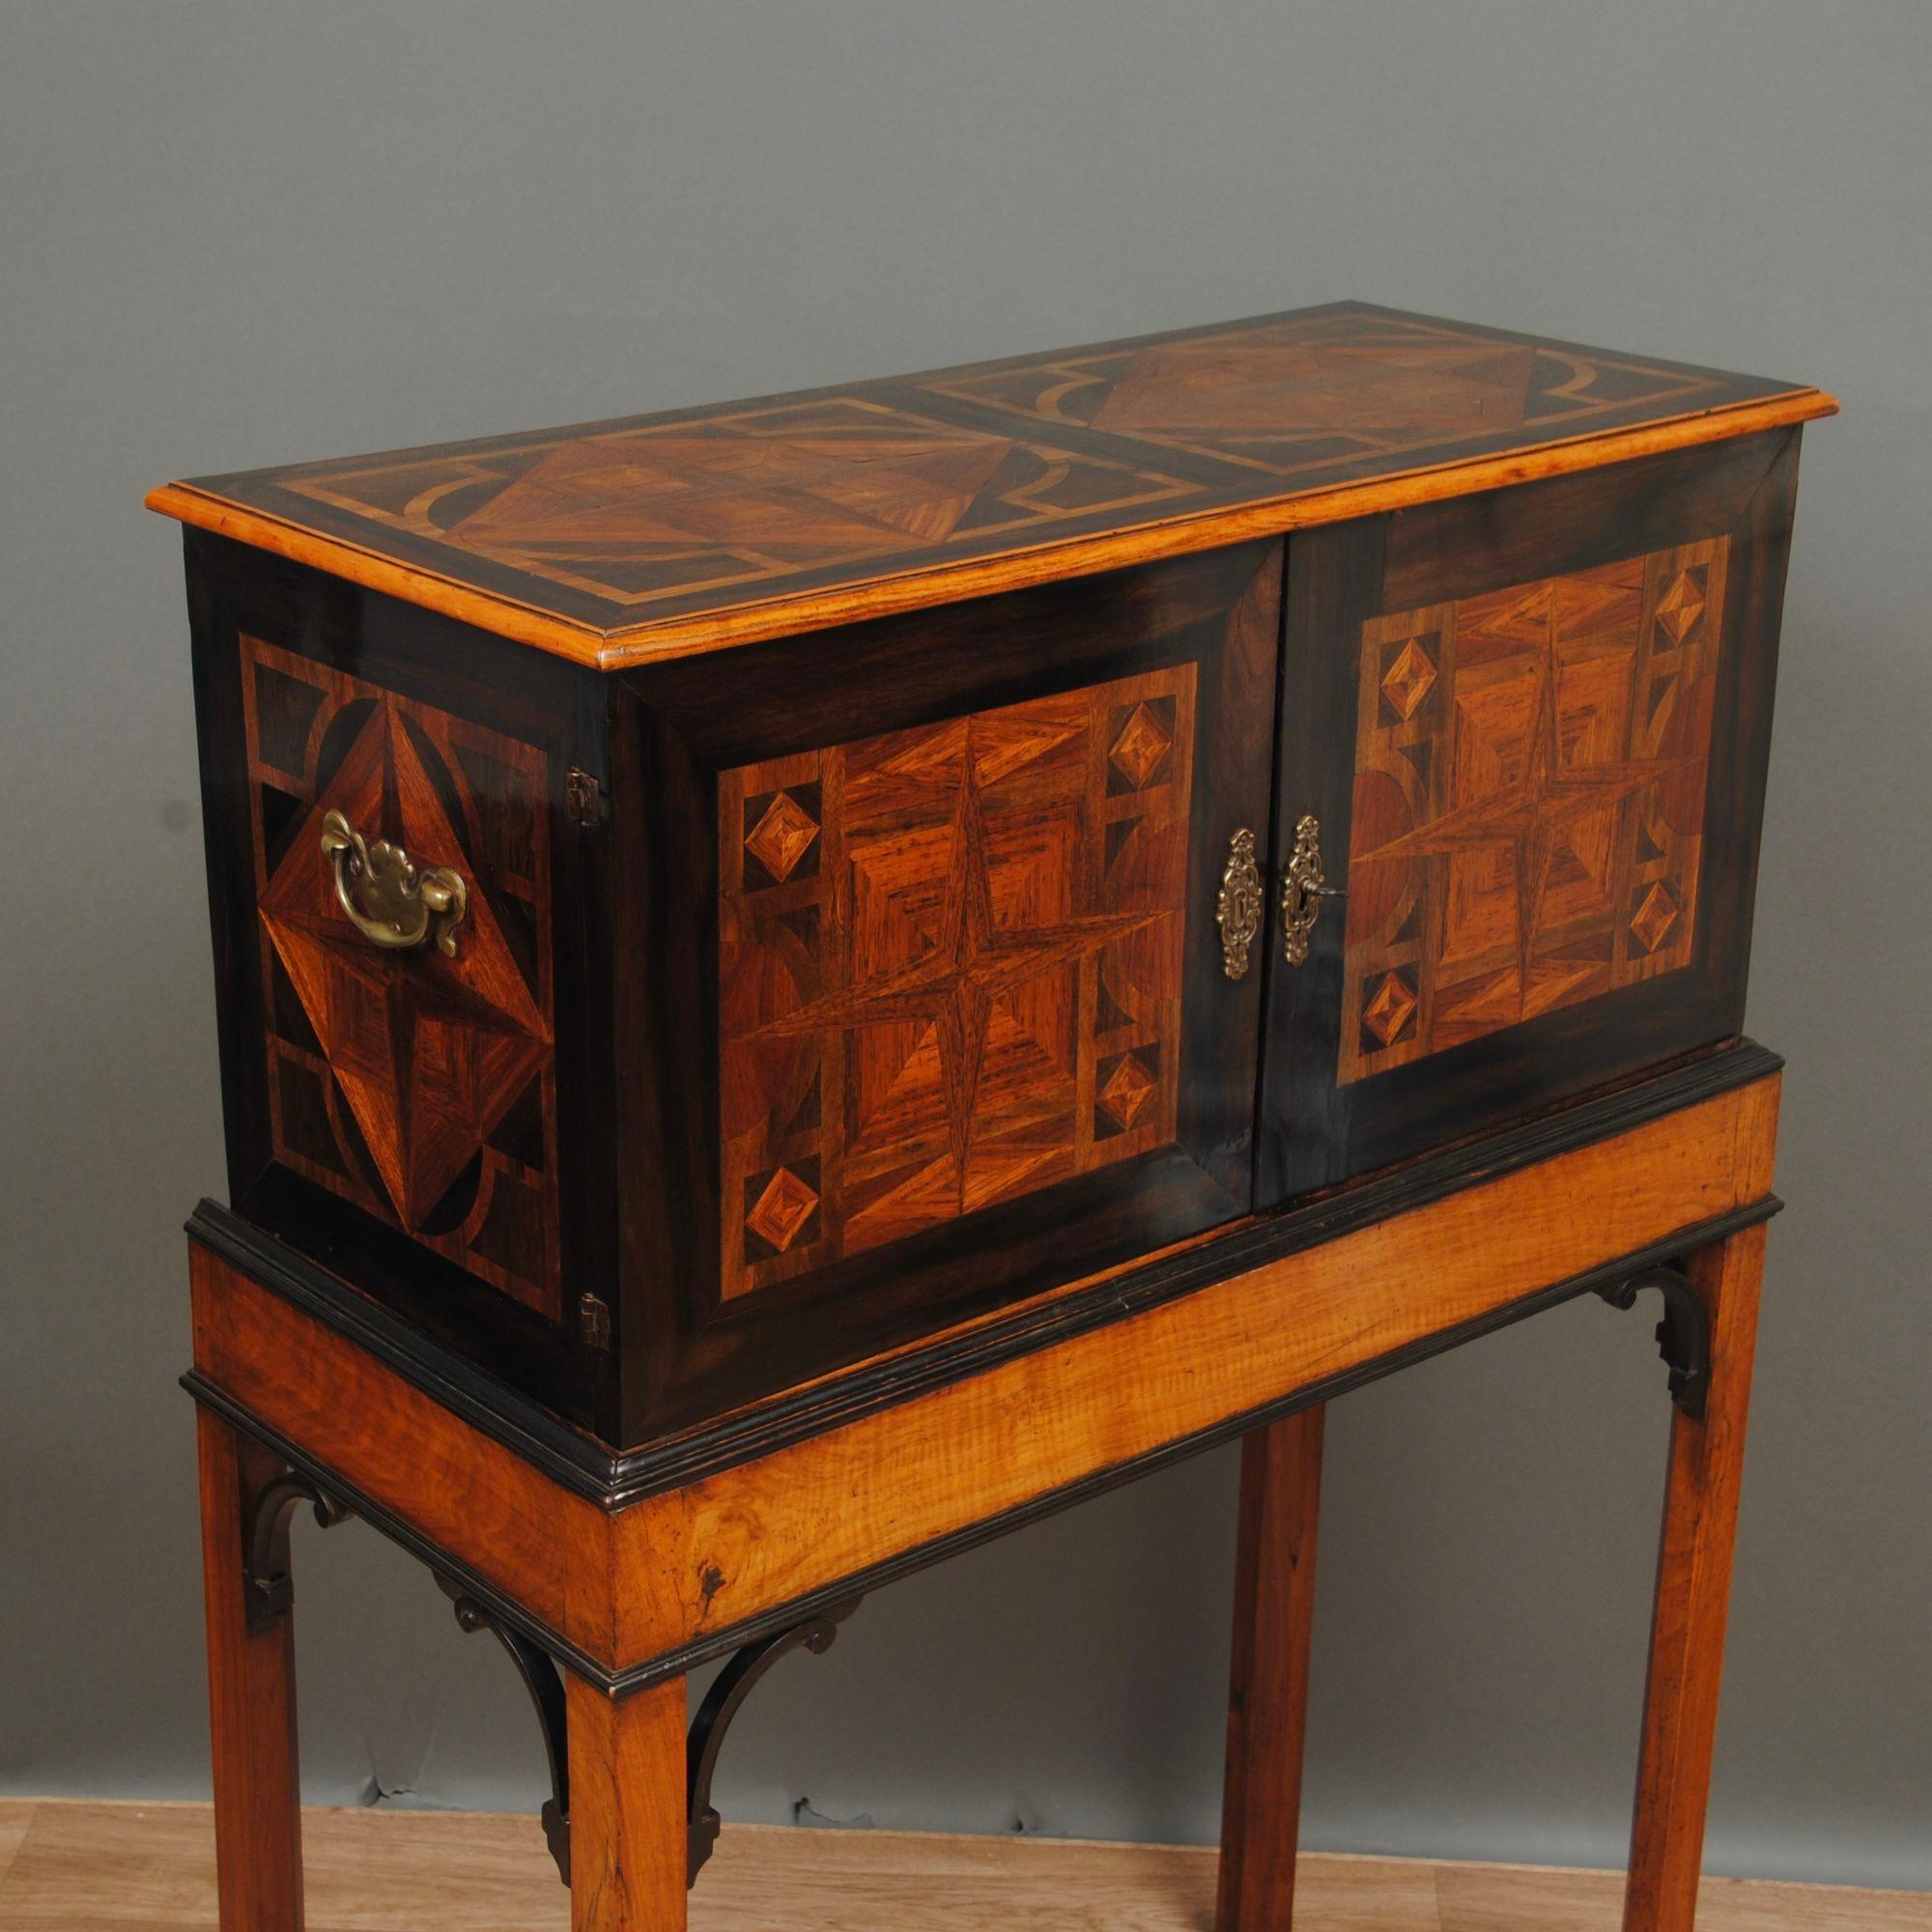 A fine 17th century german table cabinet with geometric marquetry inlaid to the cabinet in kingwood, decorated on the sides and top. the doors open to reveal a well fitted interior with drawers and central cupboard again all inlaid in geometric